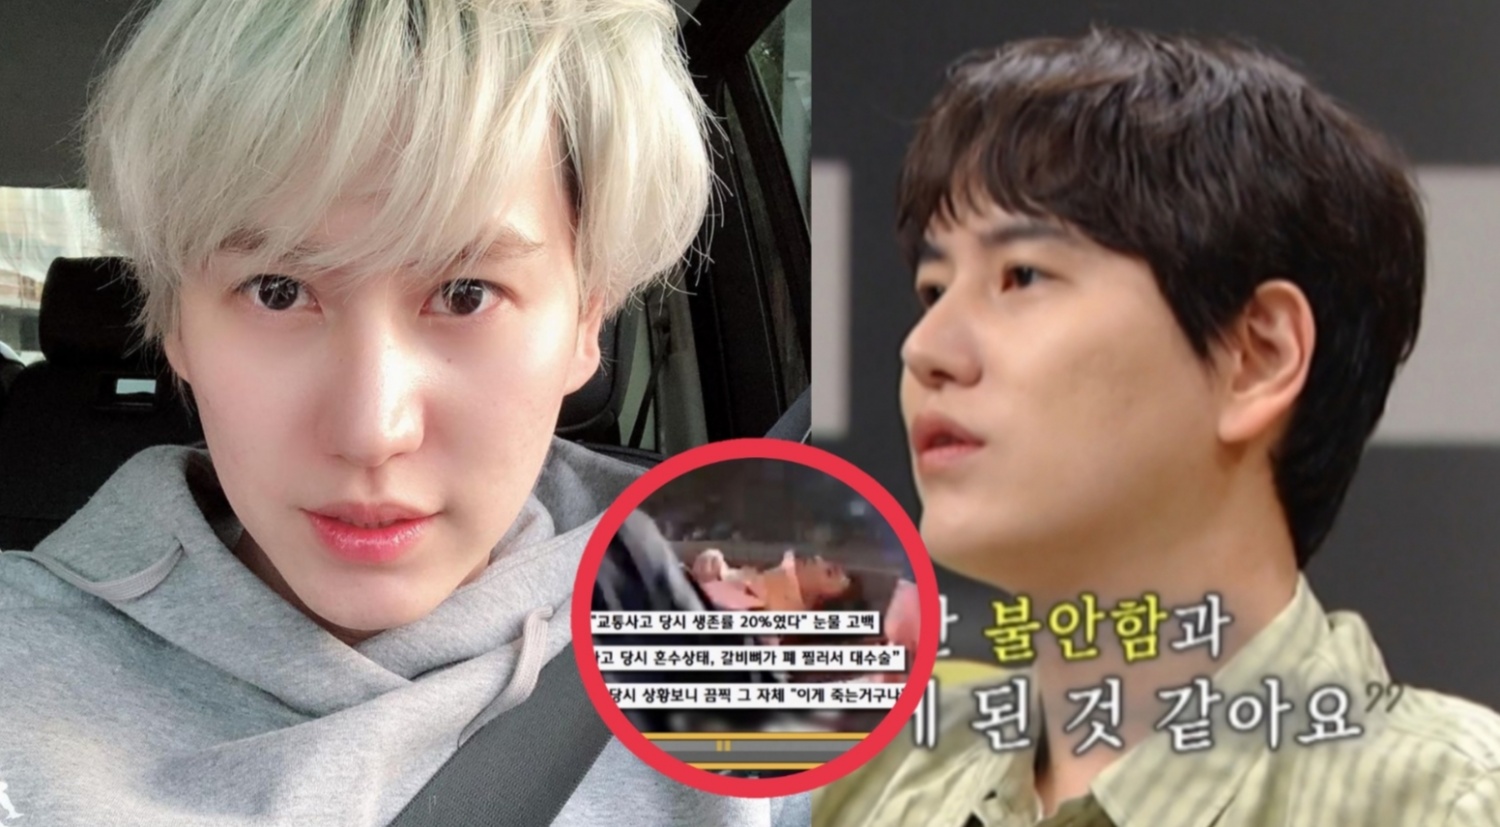 Kyuhyun recalls a 2007 car accident that almost cost him his life, the aftermath he experienced